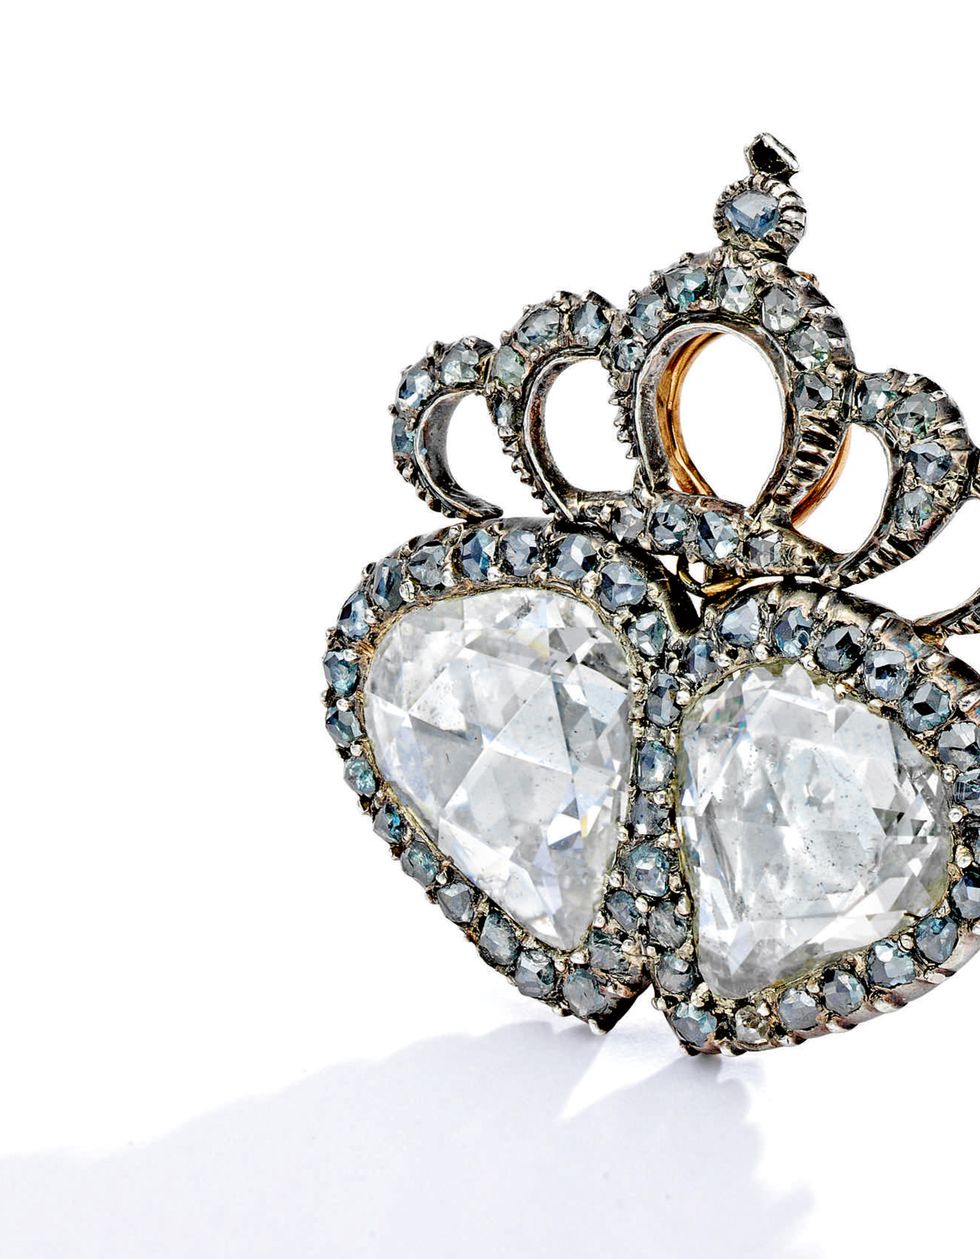 Fred Leighton's Personal Collection of Jewelry Goes Up For Auction